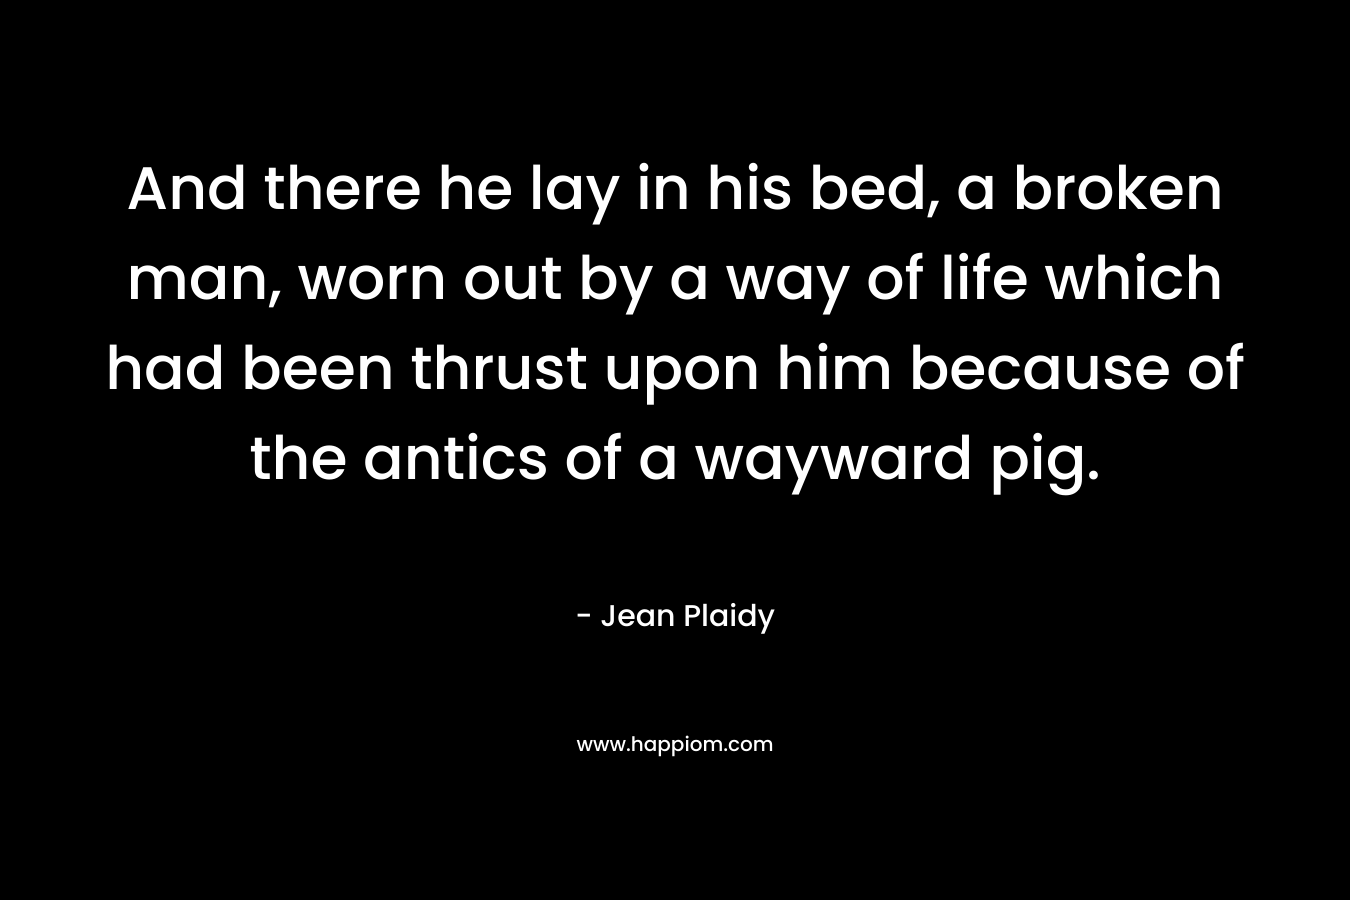 And there he lay in his bed, a broken man, worn out by a way of life which had been thrust upon him because of the antics of a wayward pig.